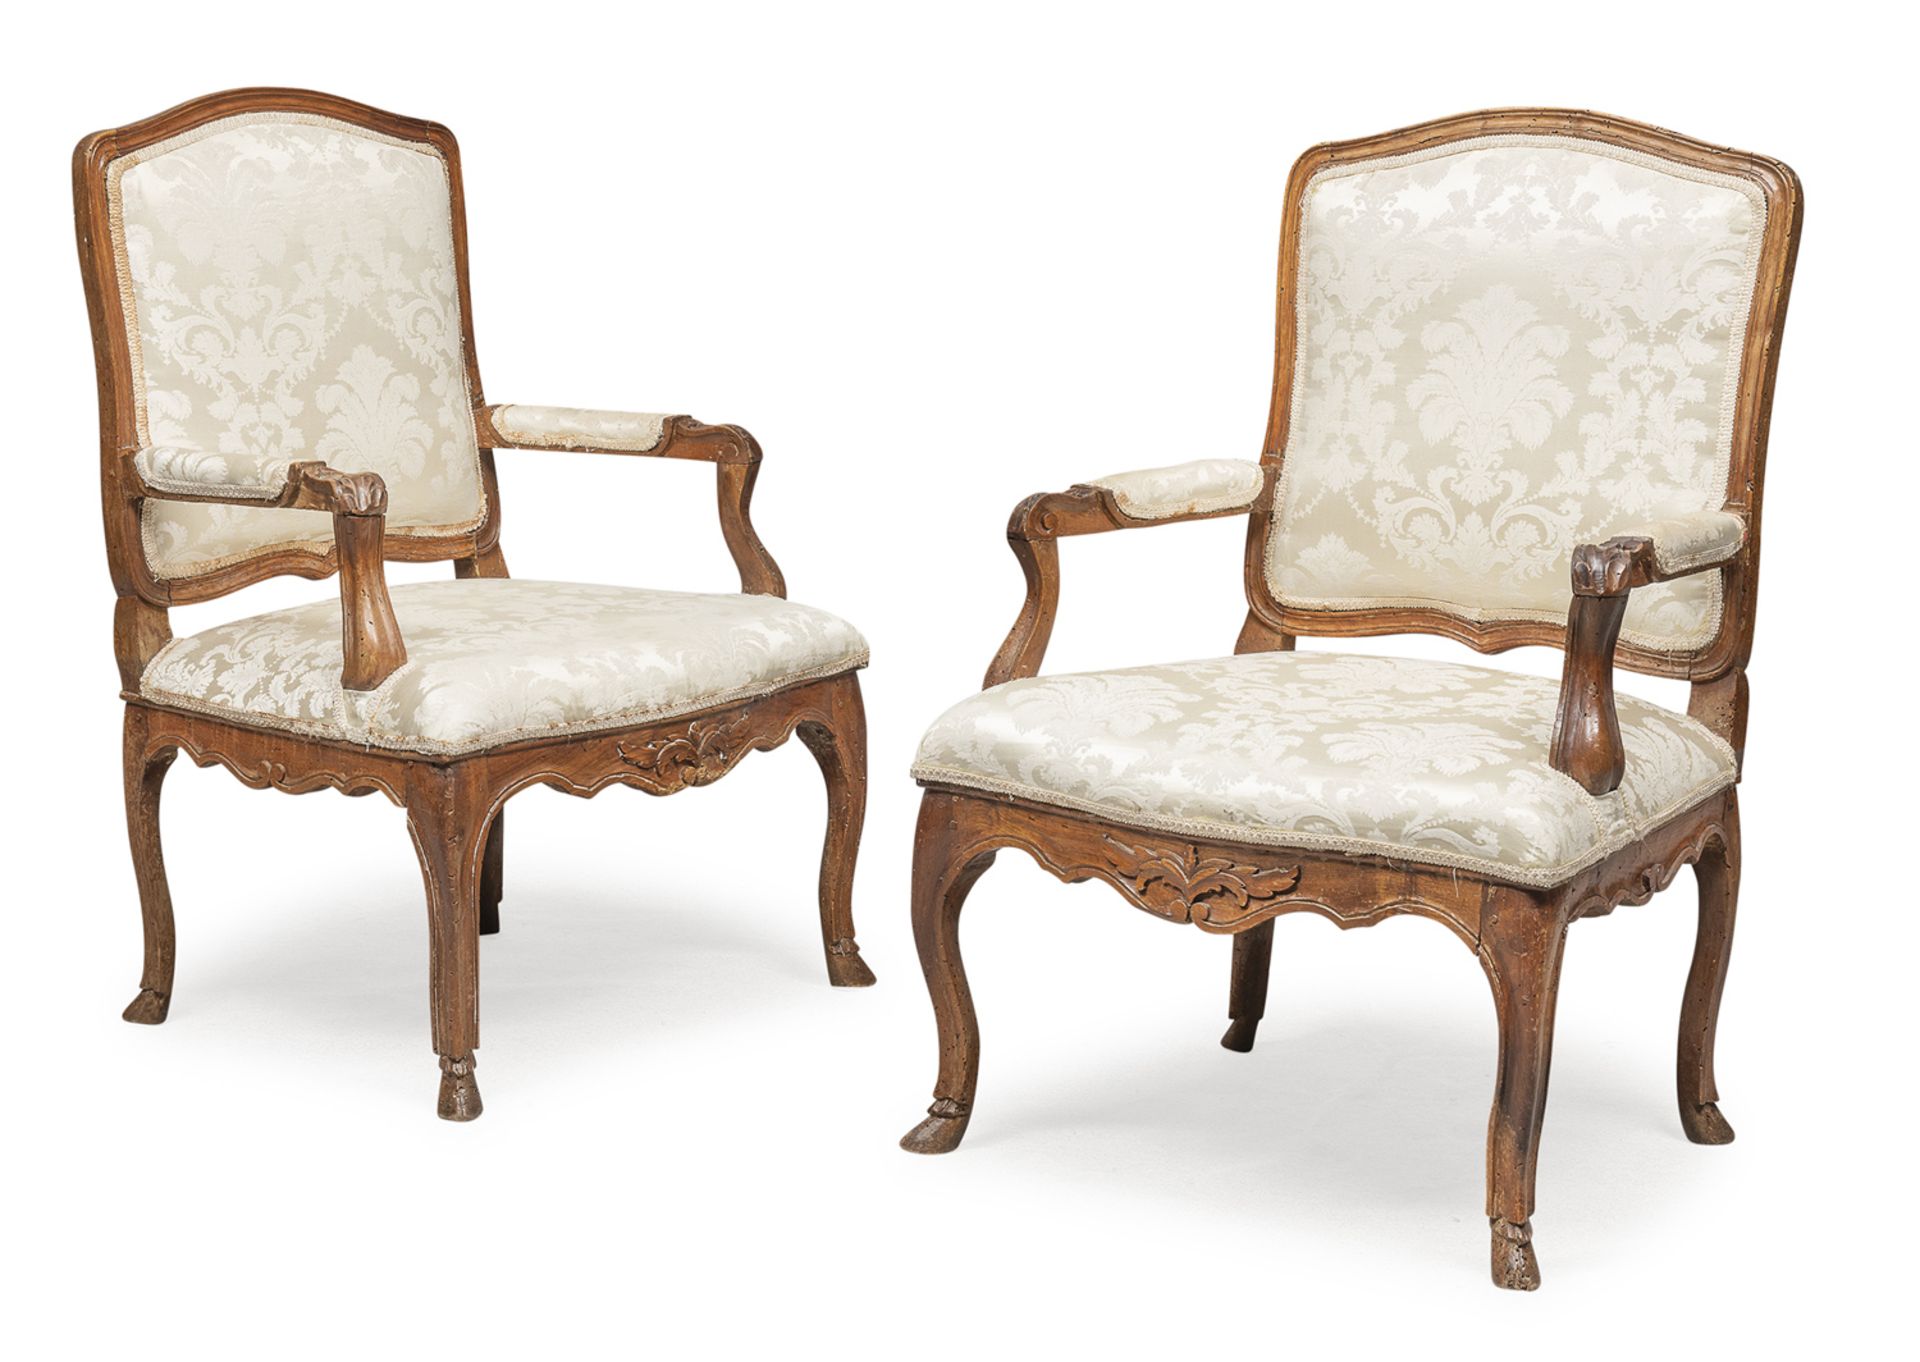 PAIR OF WALNUT ARMCHAIRS PROBABLY 18TH CENTURY NORMANDY